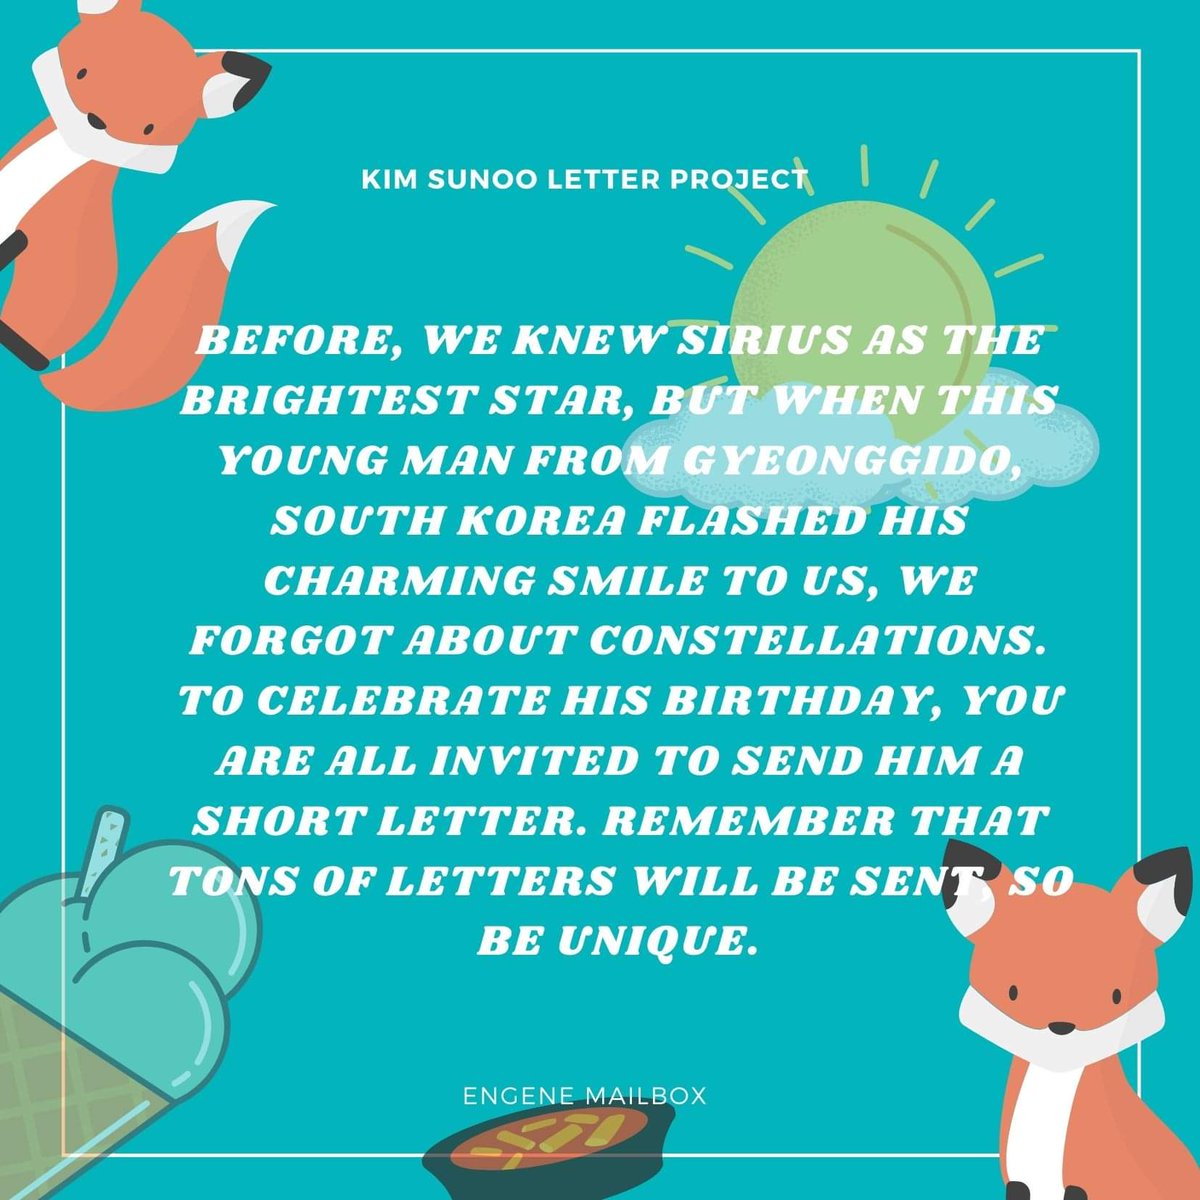 Good day!Calling out all Baragis and co- Engenes to participate to our first Letter Project entitled The Birth of the Brightest Star Kim Sunoo.Reminder : The moment we'll reach 50 participants, will close the form.Google Form:  https://docs.google.com/forms/d/1C7lW3rJYnbevSuVXp8BVyAaxGQx9ehmazs86R7_2AcY/edit